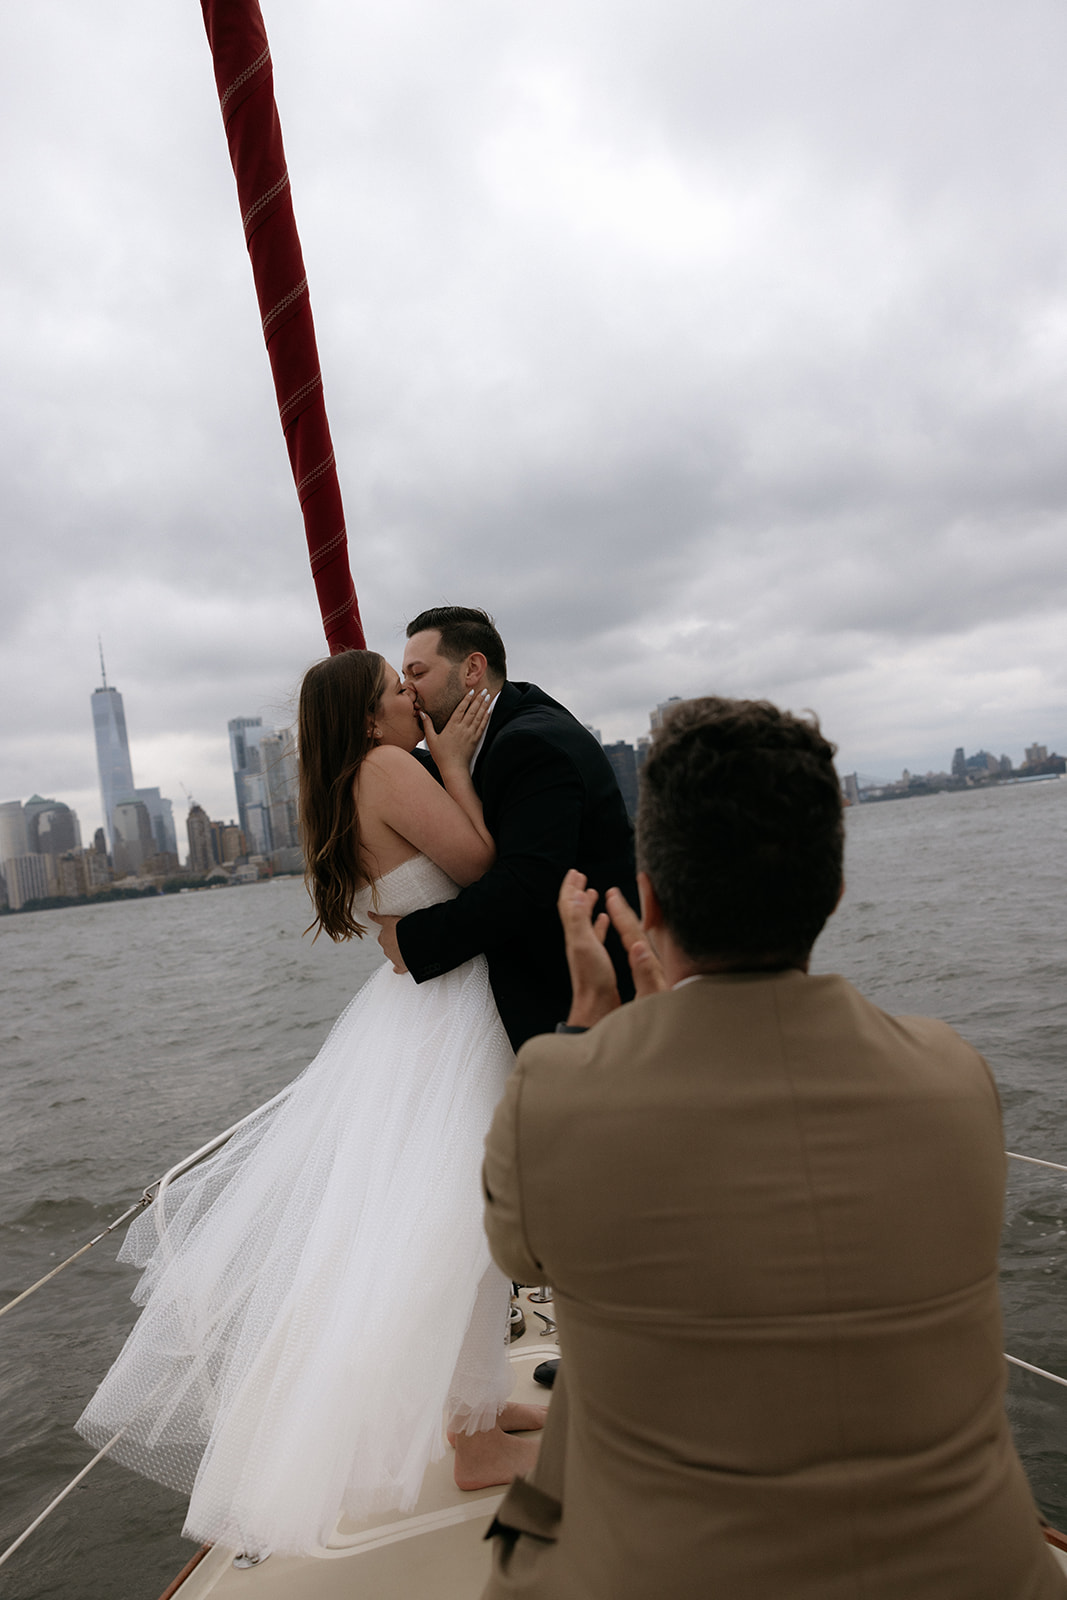 A couple who eloped on a NYC boat kiss as they become husband and wife